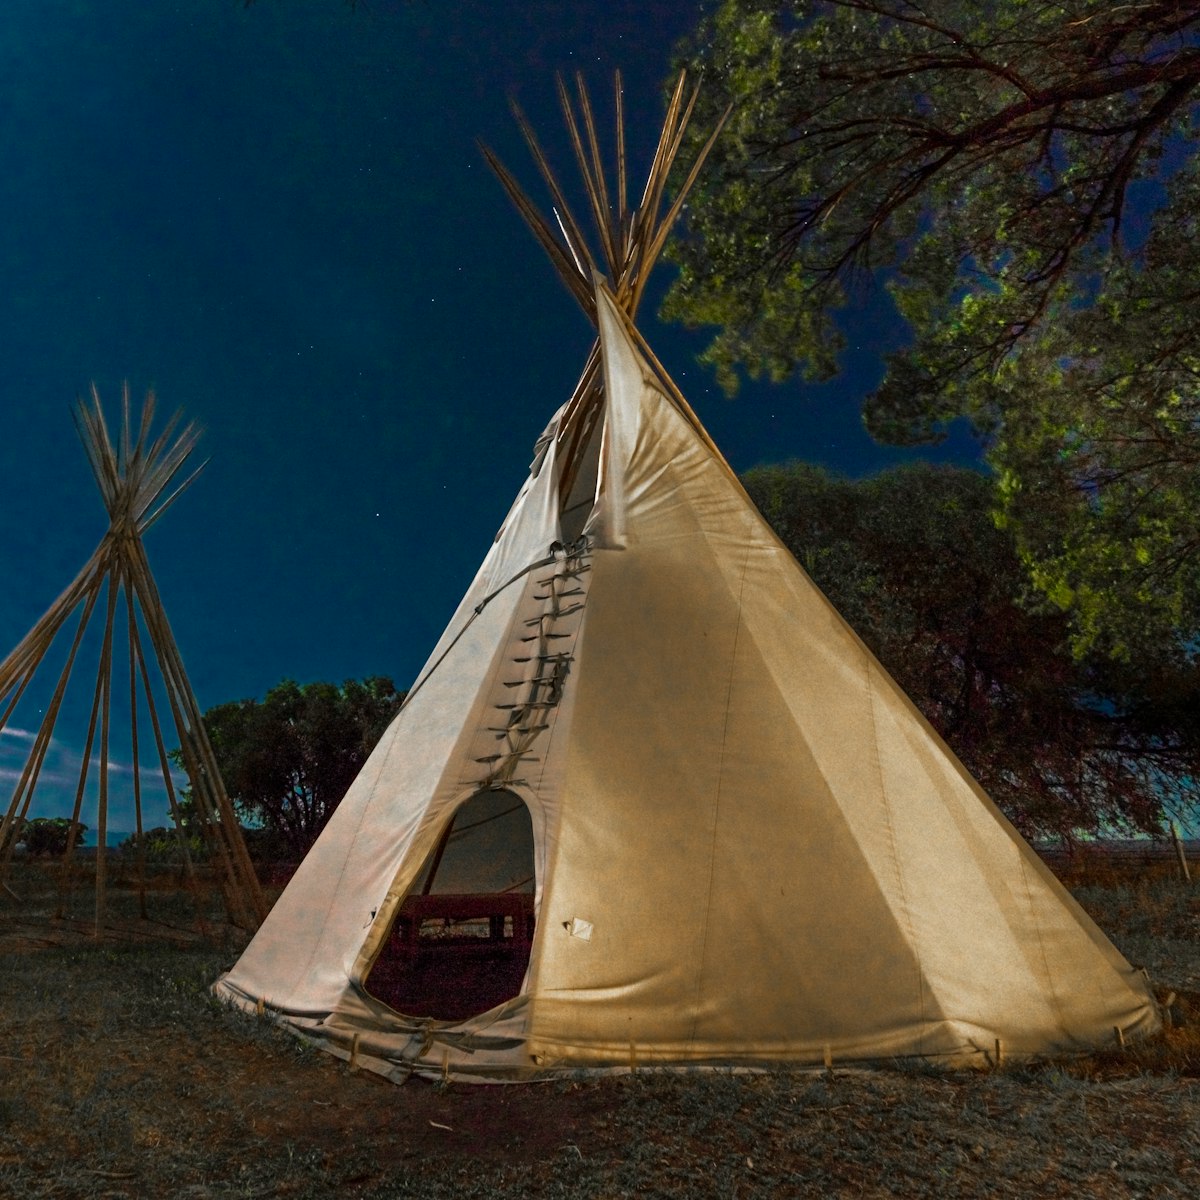 Moonlight on Indian Tepee at Ute Indian Museum, Montrose, Colorado.